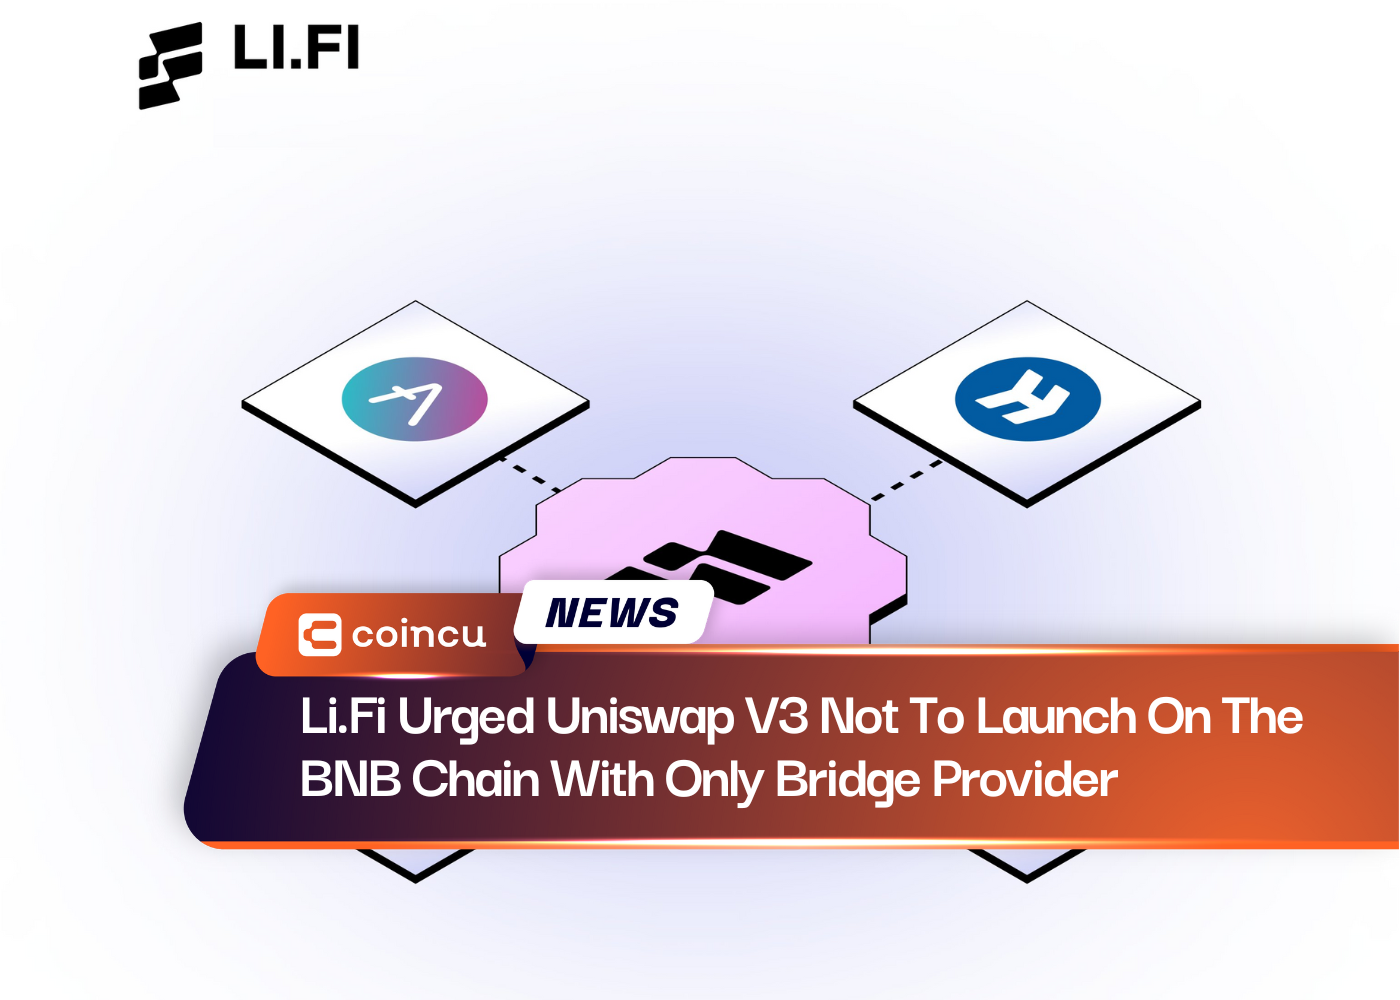 Li.Fi Urged Uniswap V3 Not To Launch On The BNB Chain With Only Bridge Provider